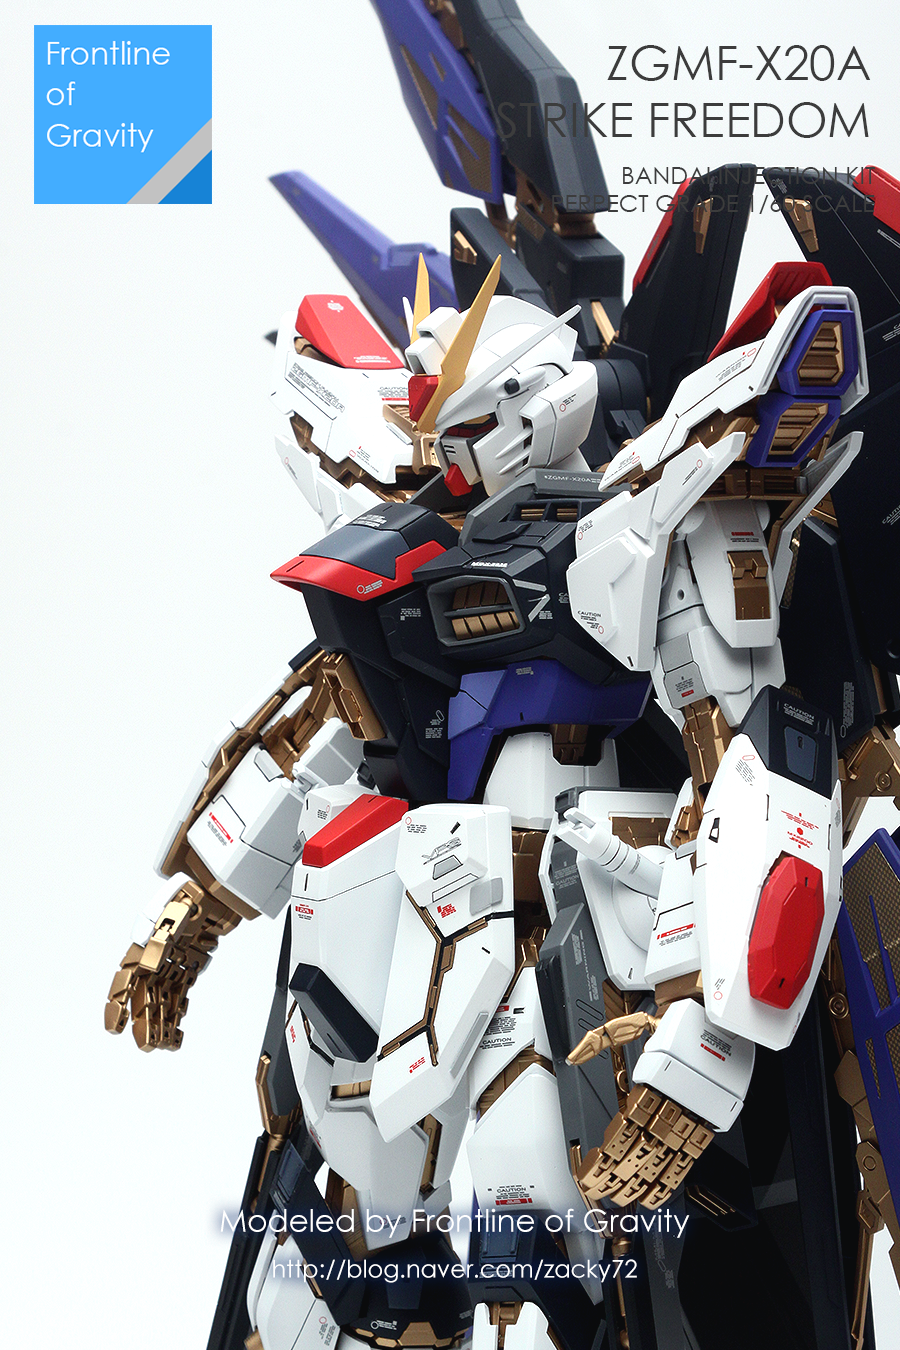 pg_strikefreedom_fin08.png